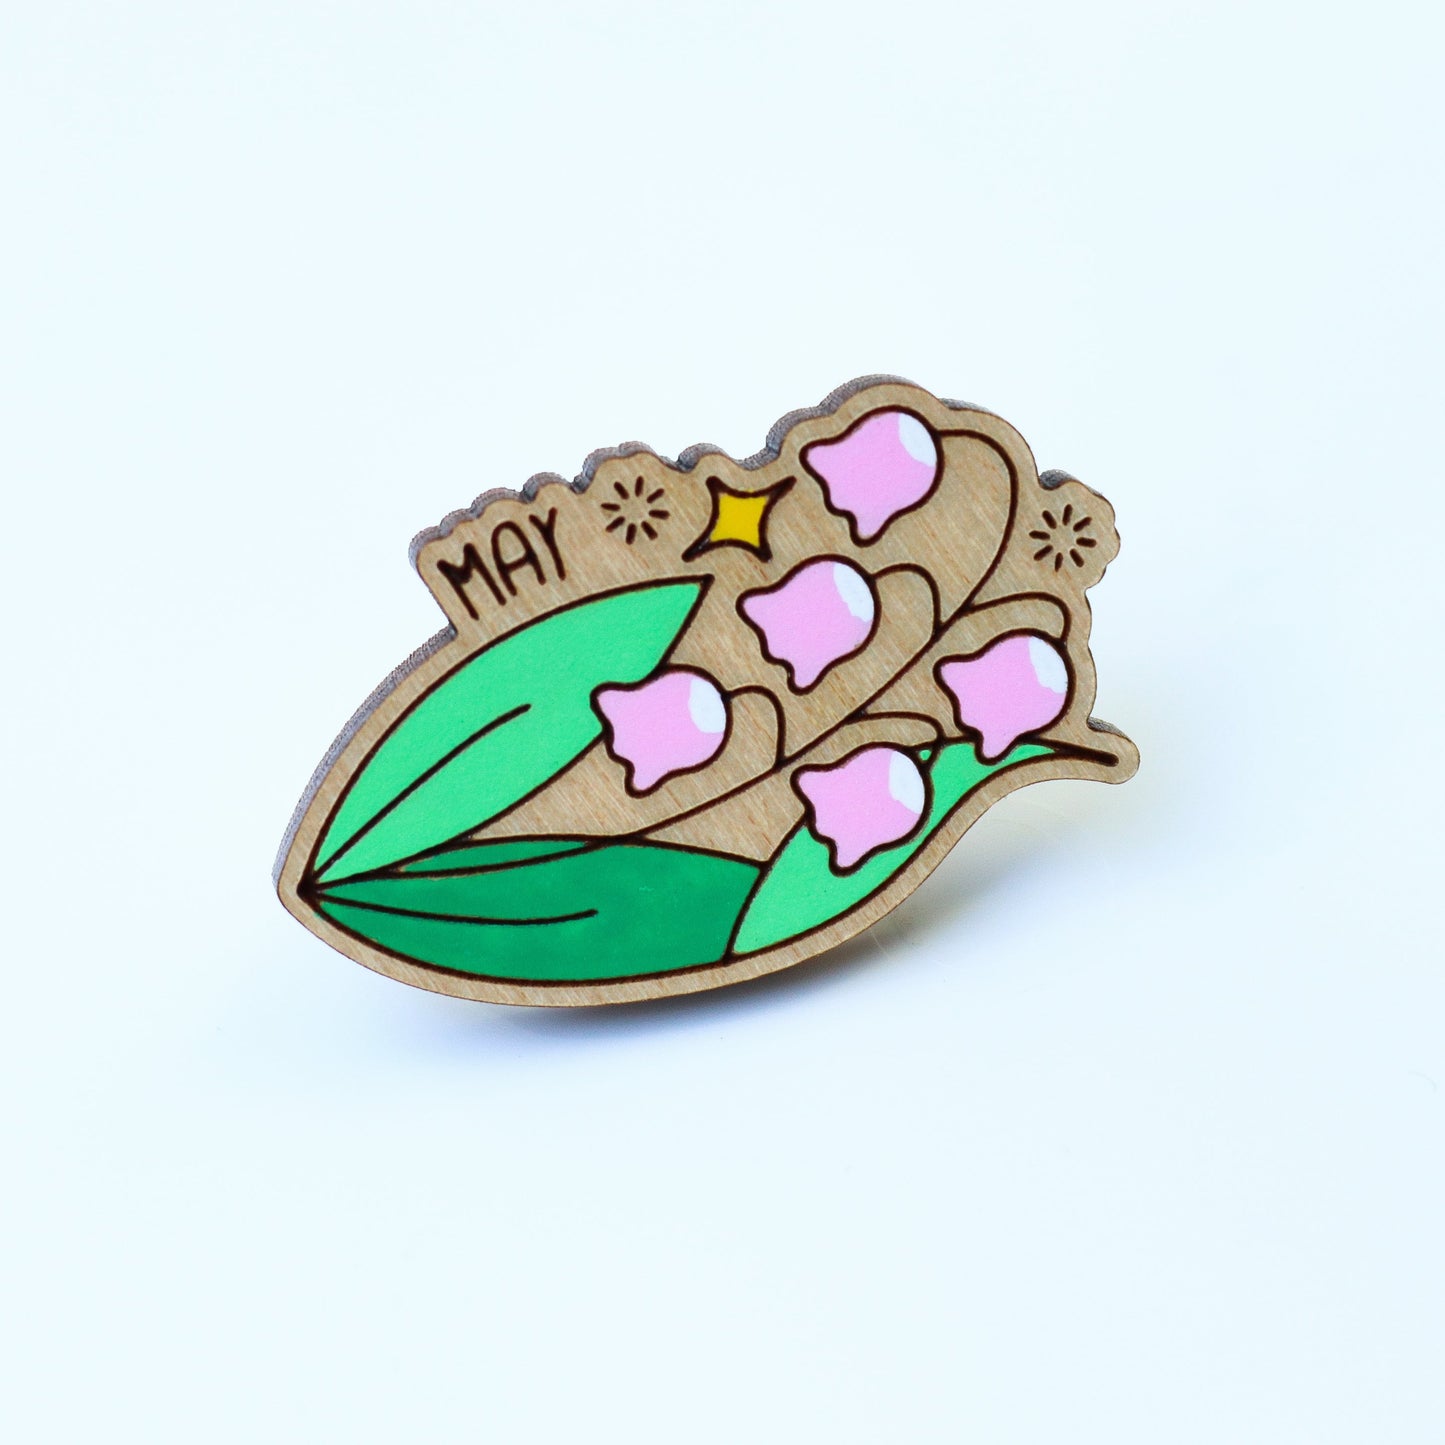 May Birth Month Flower Pin - Lily Of The Valley